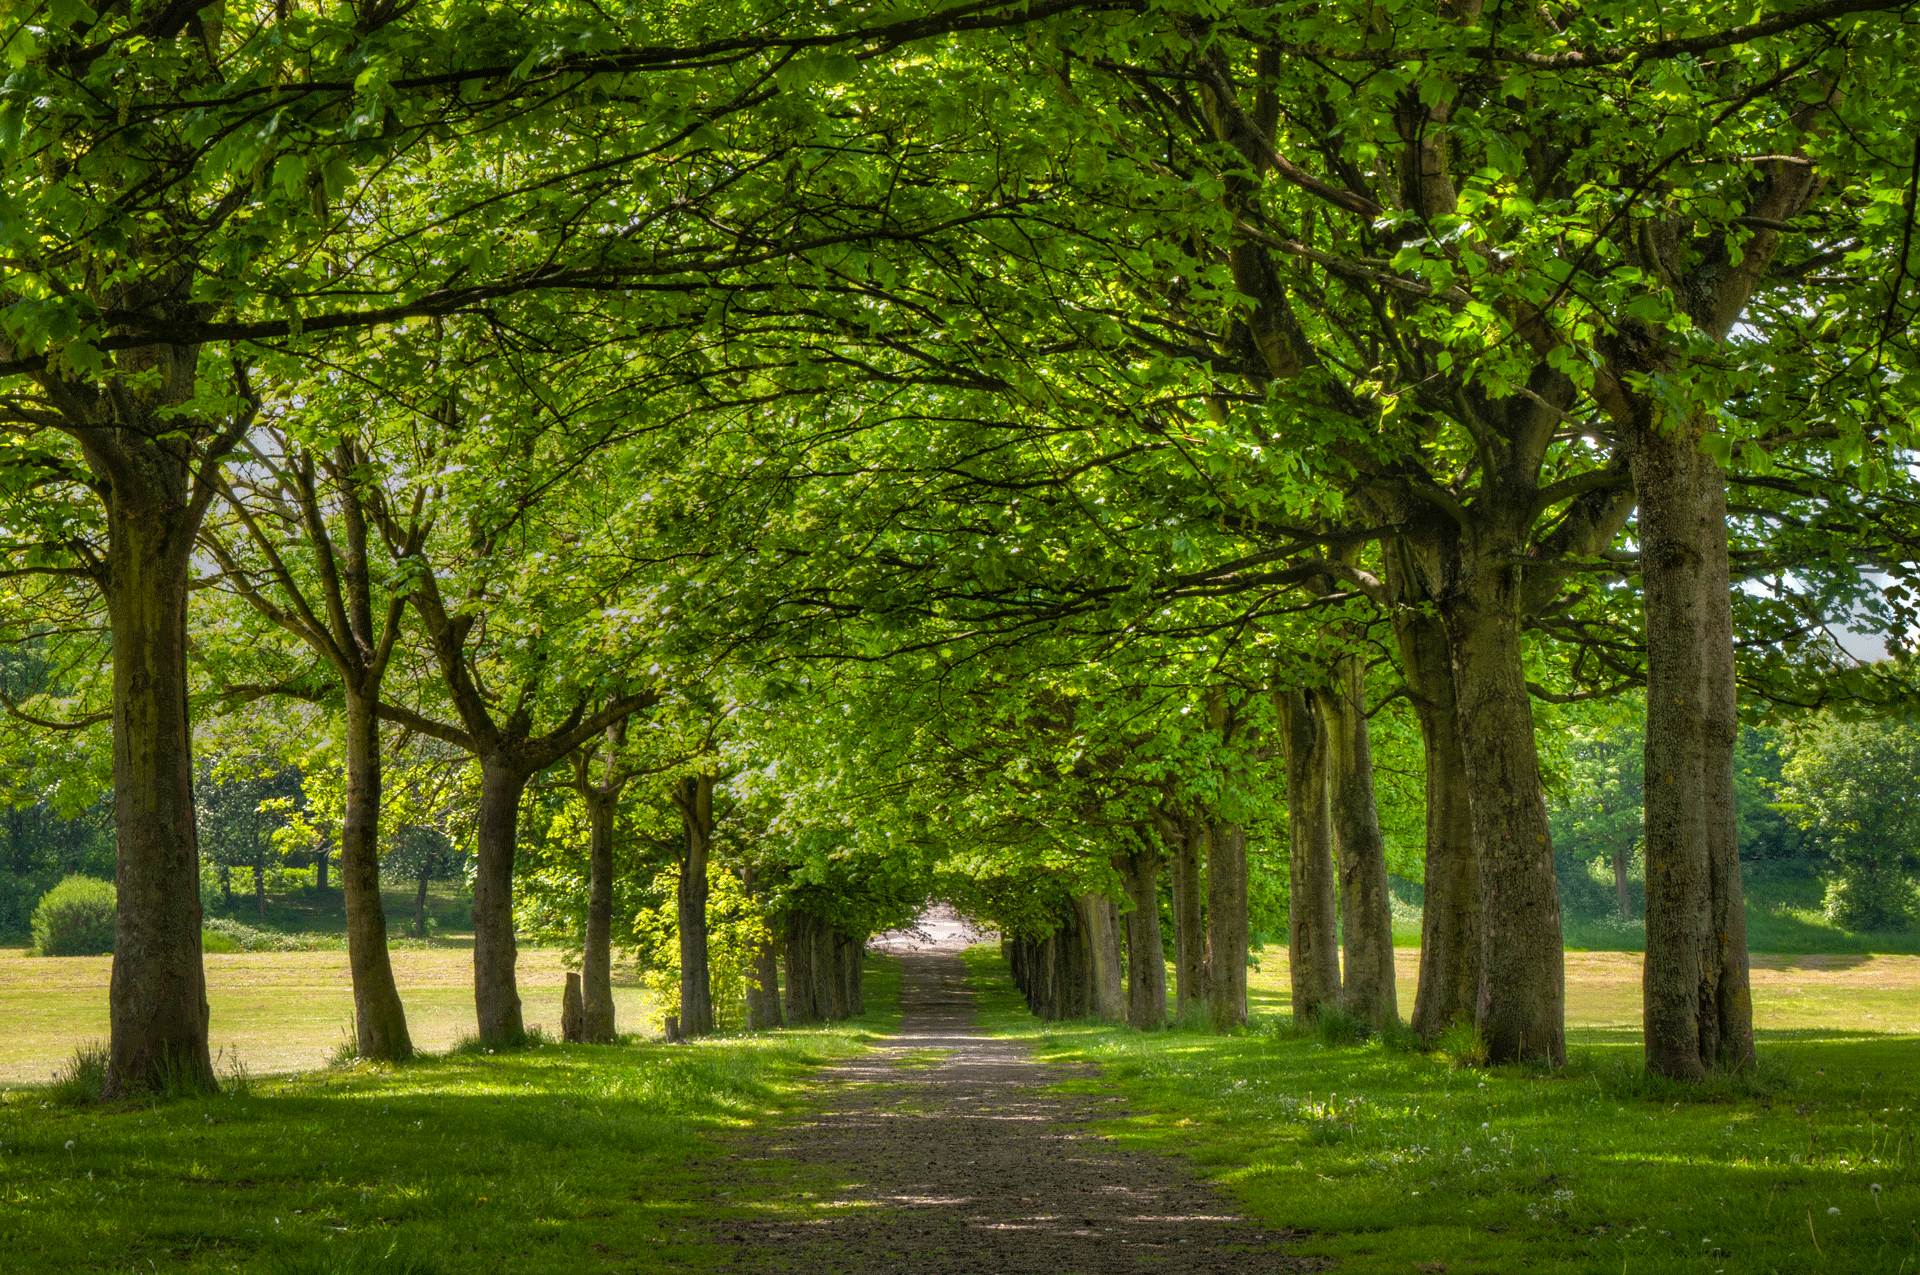 ffine art, trees, green, entwinded, uk, Salford, summer, pathway, duchy, landscape photography, beauty, leaves, tree trunk, treeline, tree line path, england, Manchester, pathway